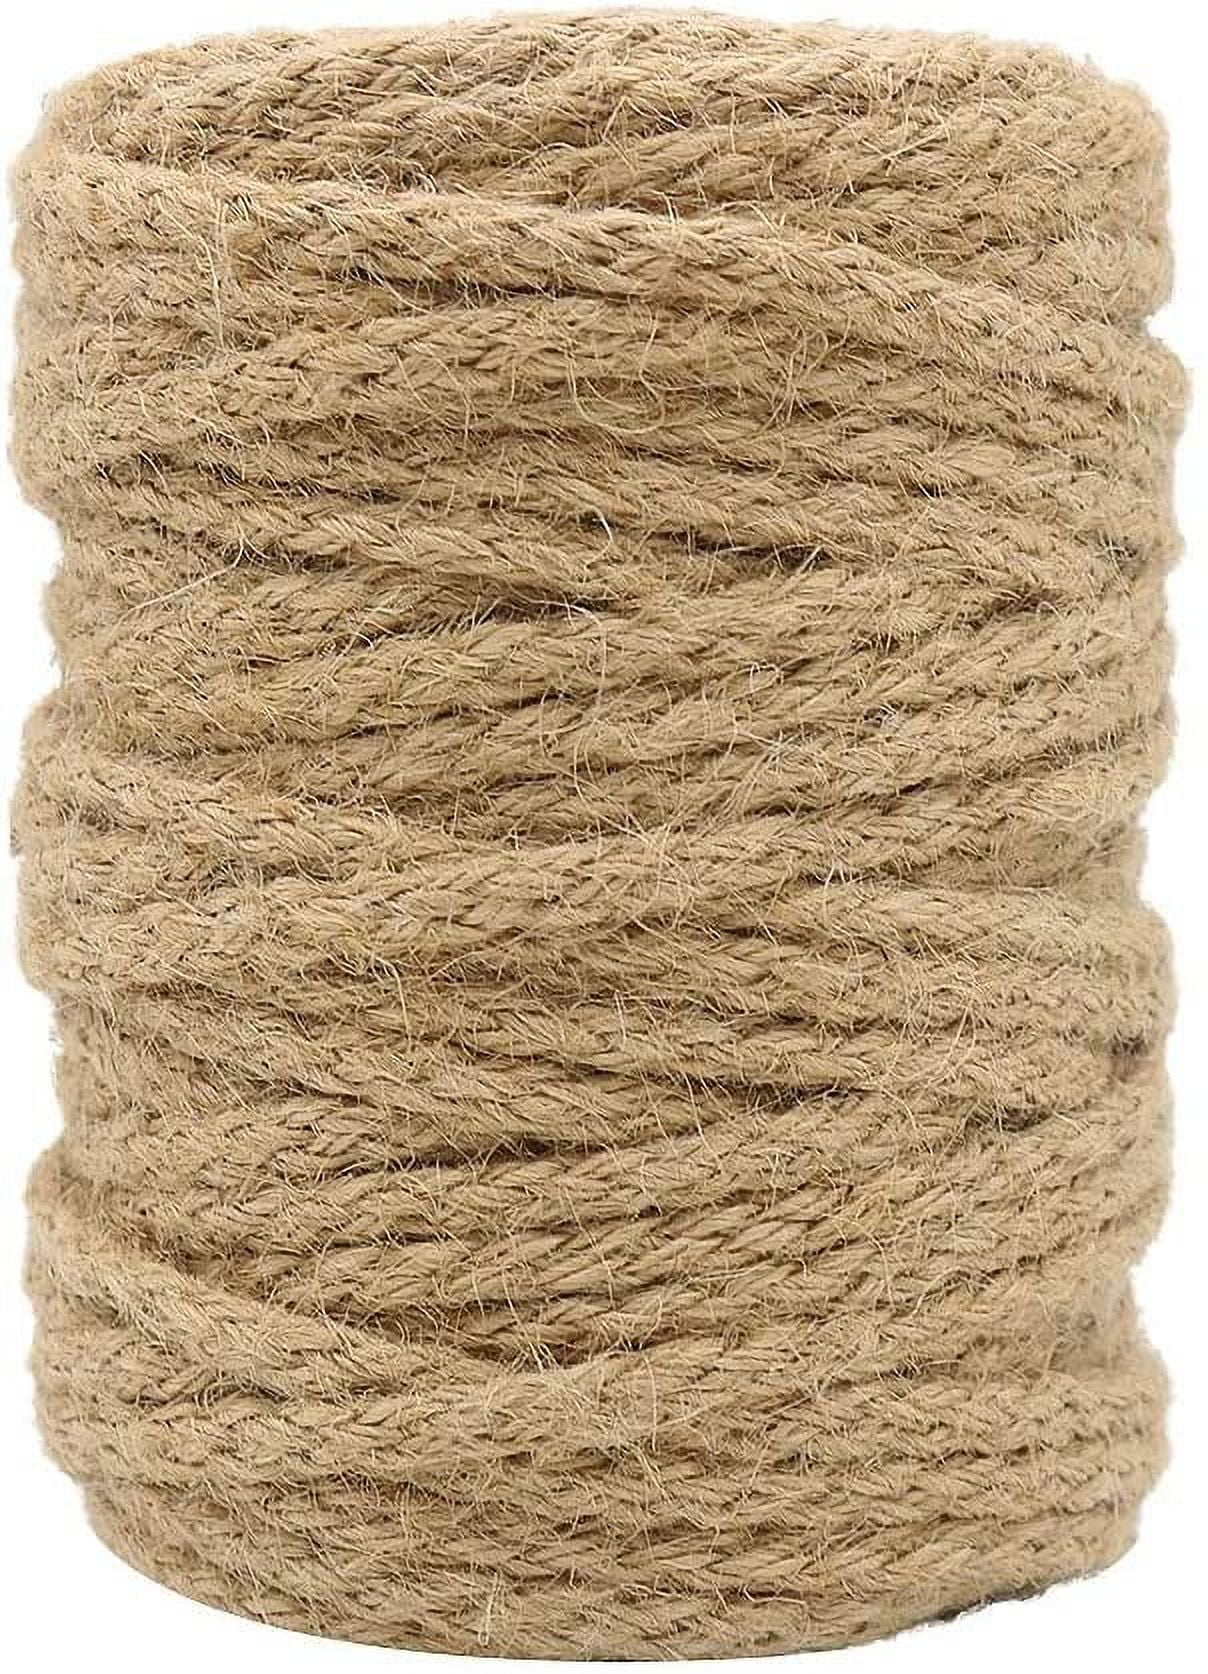 NEW ARRIVALS ] 1 Roll 5mm 100m Natural Jute Twine Thickened Heavy